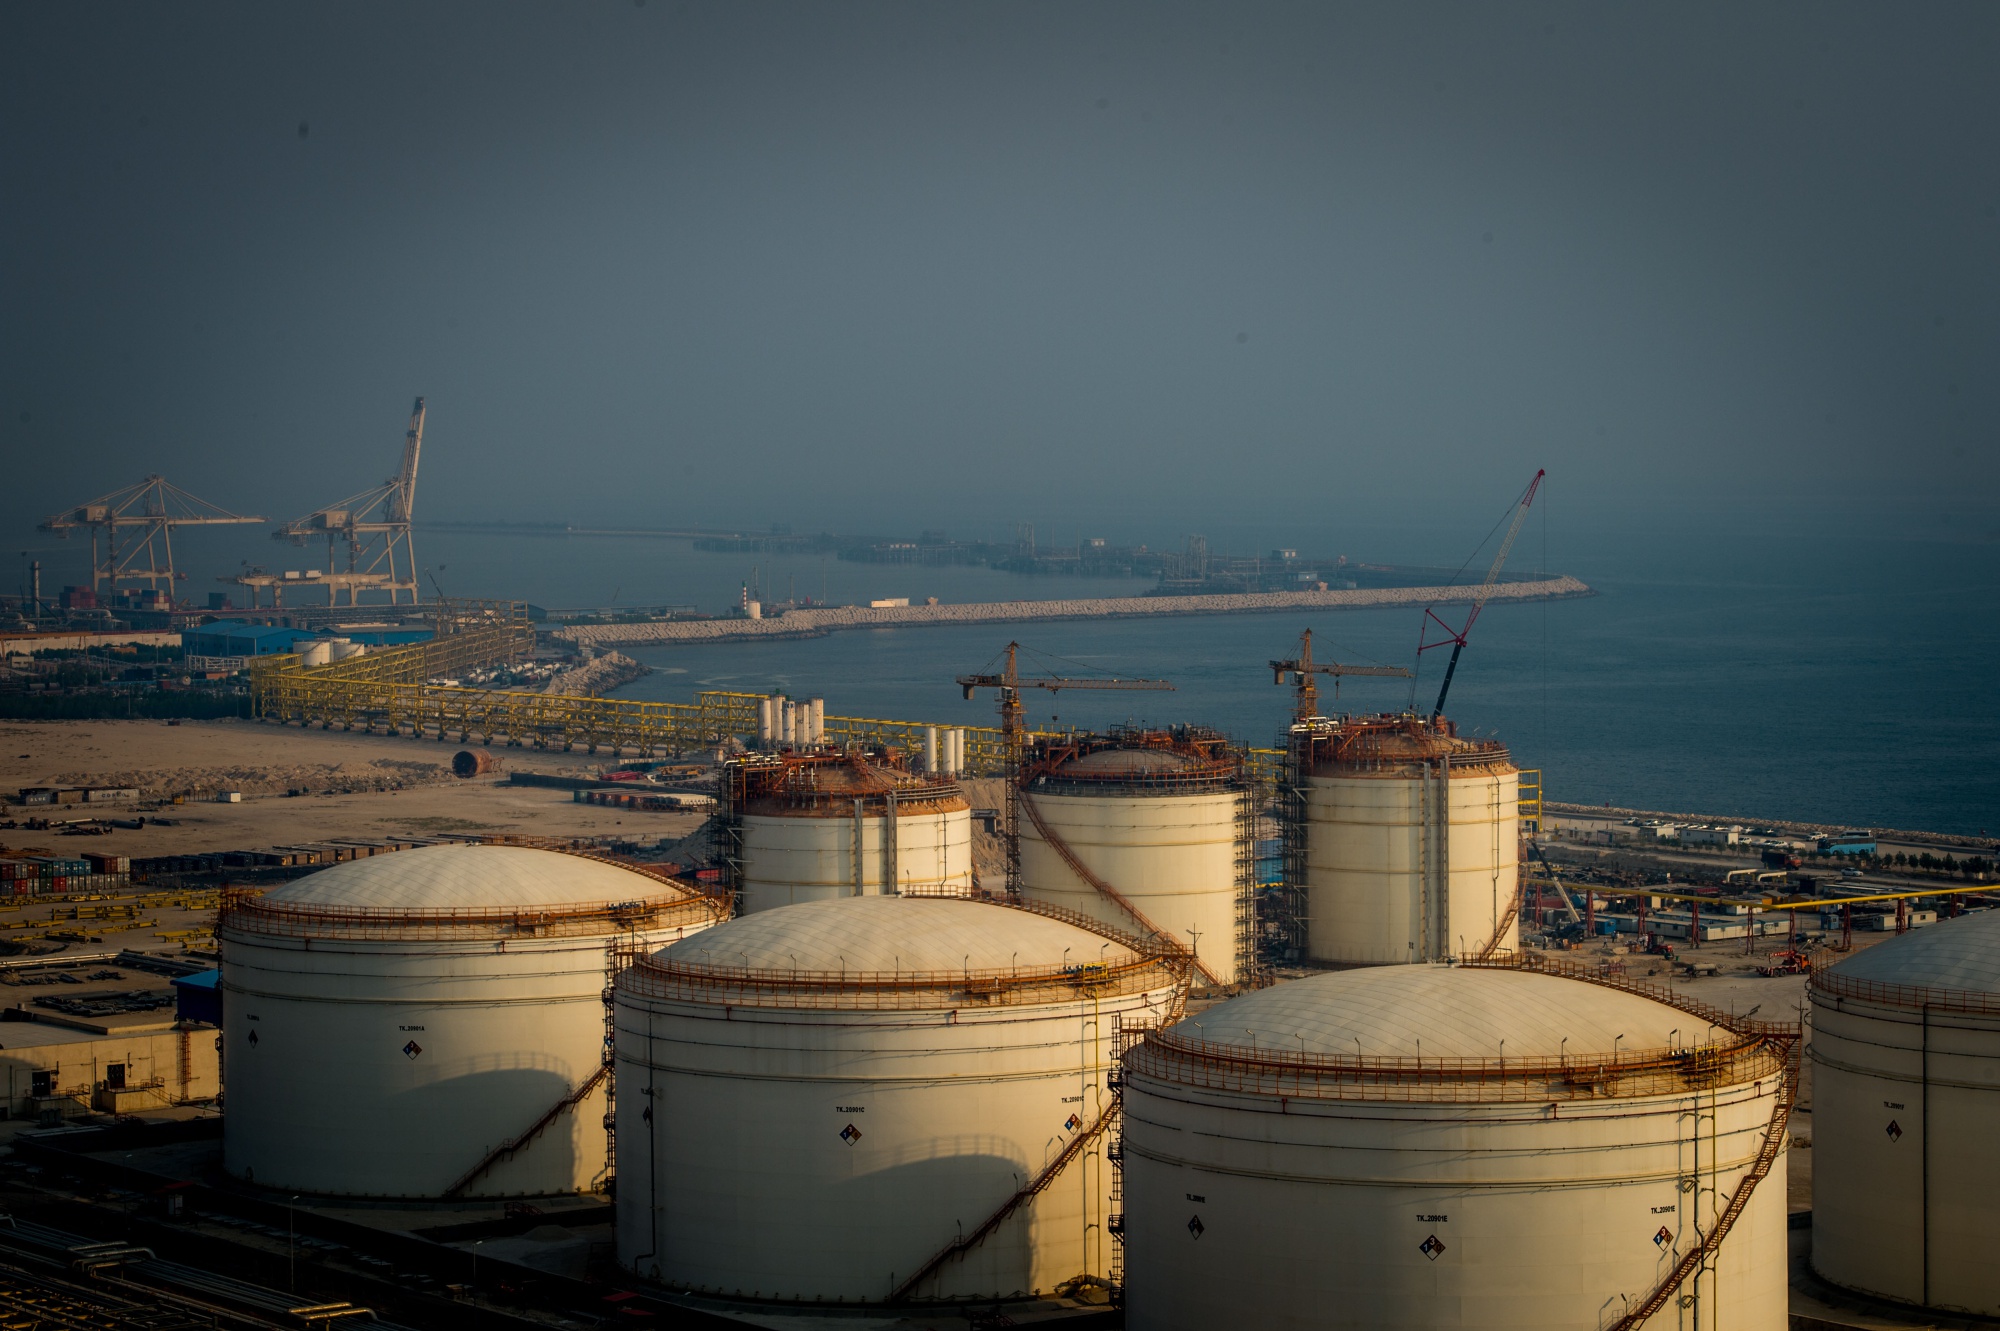 Storage tanks for petrochemicals stand&nbsp;beside the Persian Gulf in Asaluyeh, Iran.